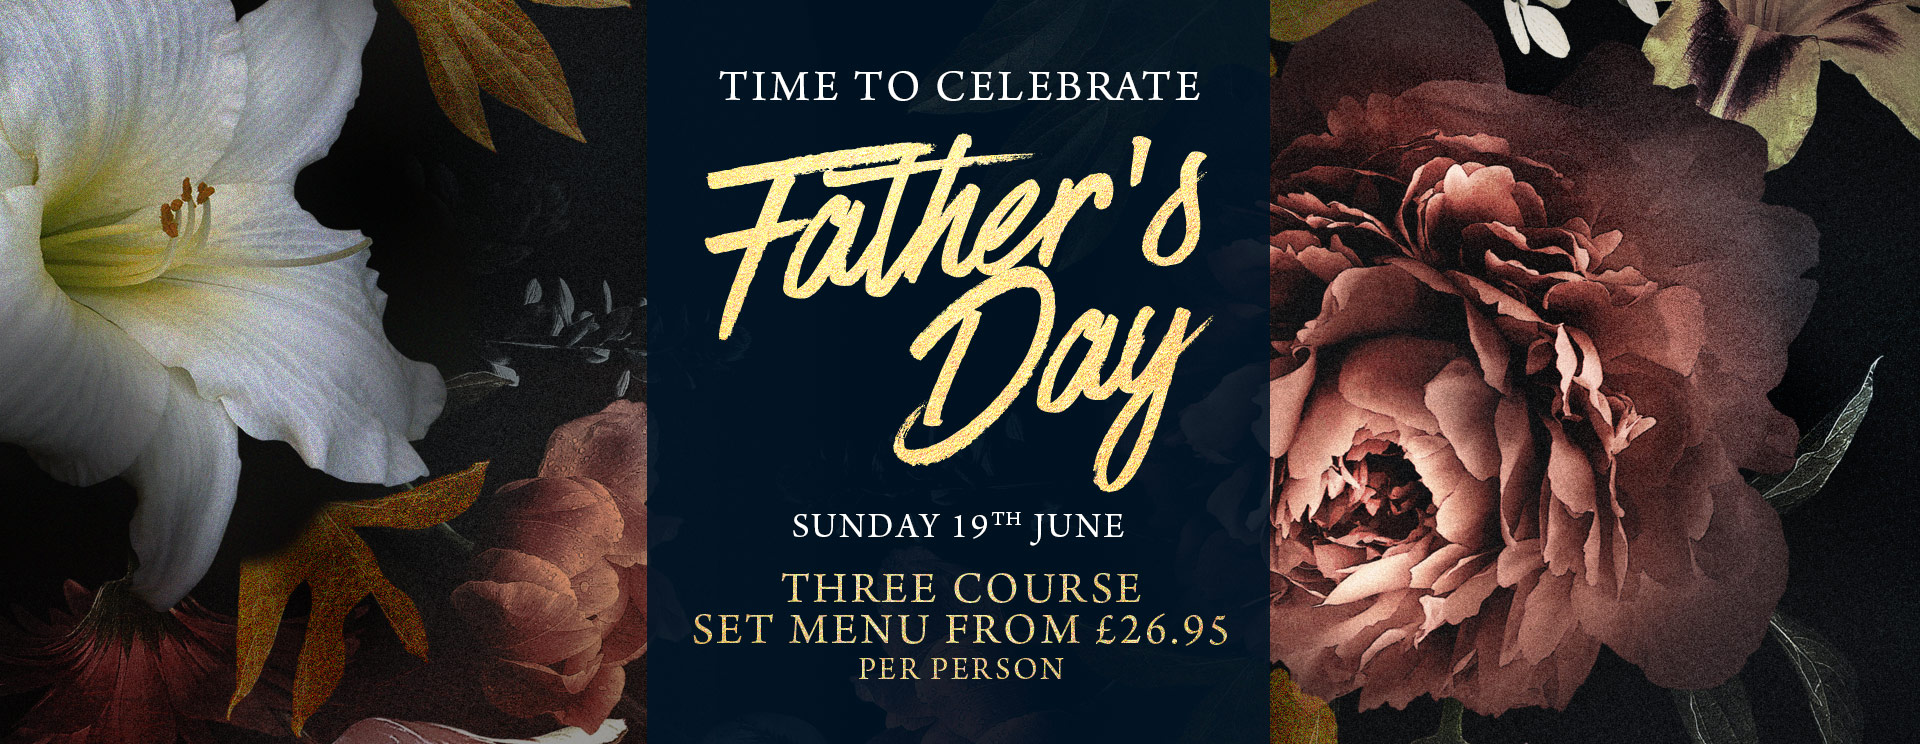 Fathers Day at The Wicked Lady